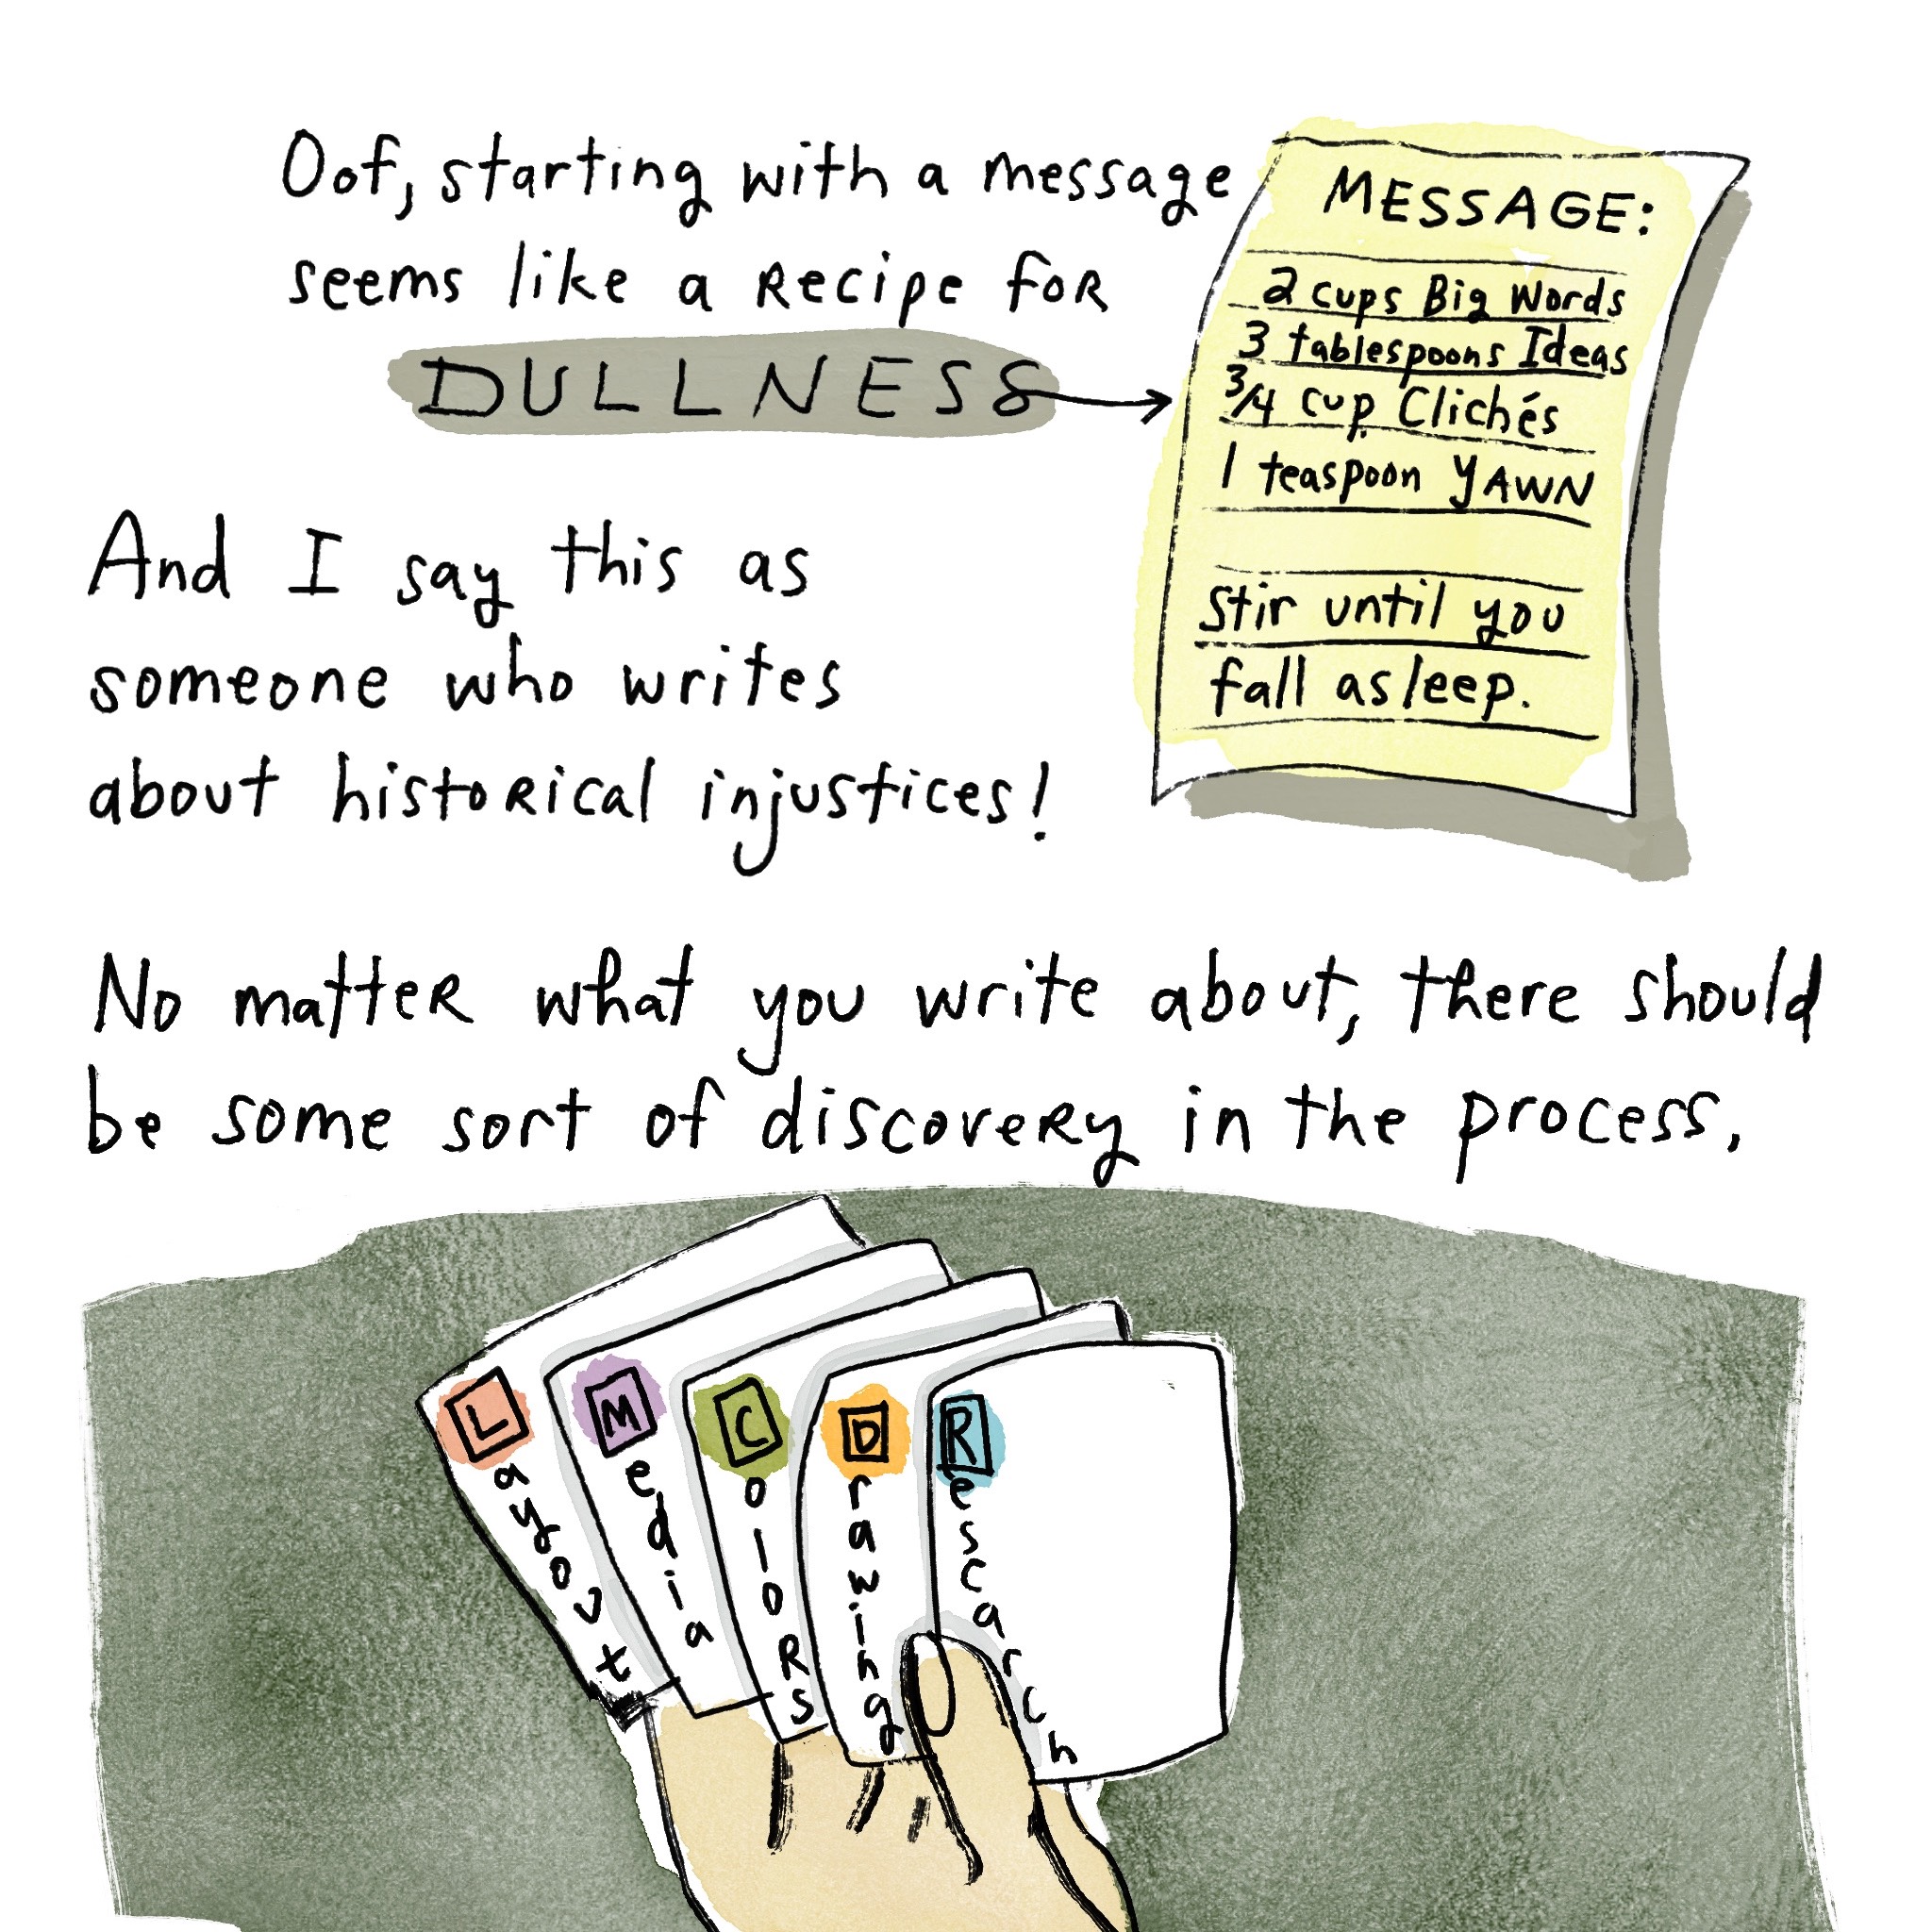 Image is a sketch of a recipe and several recipe cards. The word DULLNESS is highlighted in gray. Accompanying text: "Oof, starting with a message seems like a recipe for DULLNESS (MESSAGE: 2 cups Big Words, 3 tablespoons IDEAS, 3/4 cup Clichés, 1 teaspoon YAWN, stir until you fall asleep.) And I say this as someone who writes about historical injustices! No matter what you write about, there should be some sort of discovery in the process."